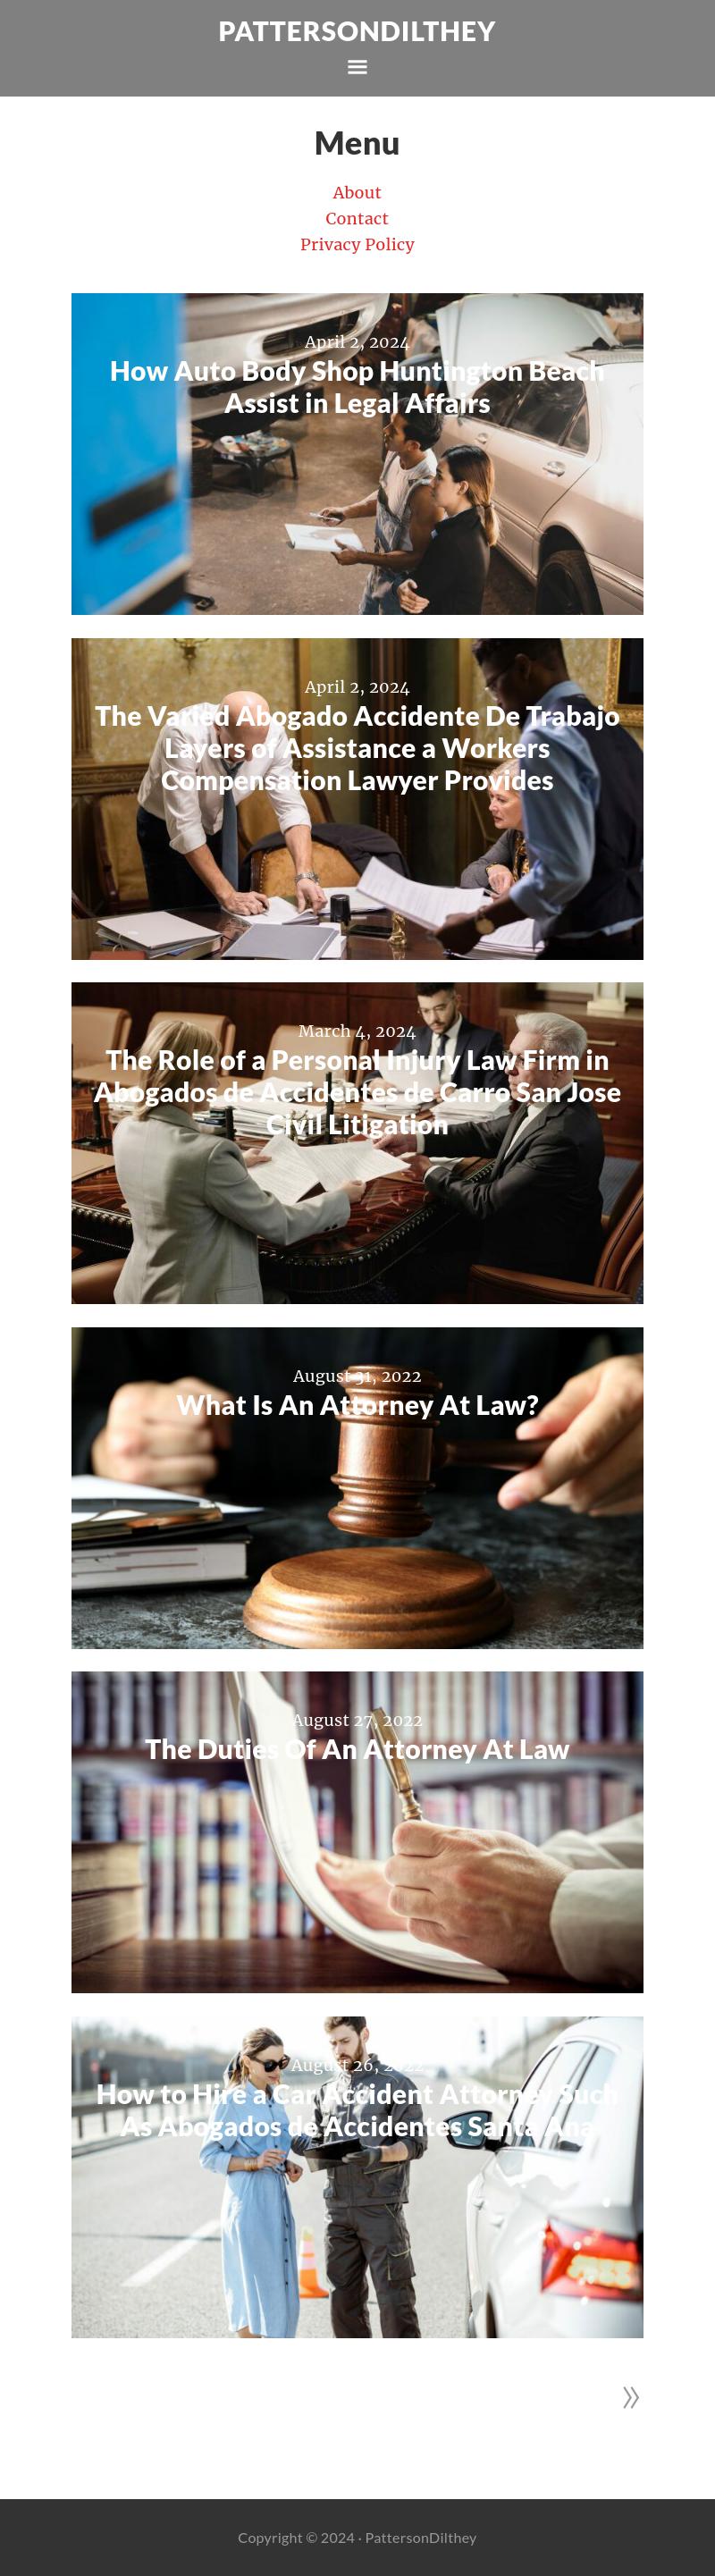 Patterson Dilthey LLP - Raleigh NC Lawyers